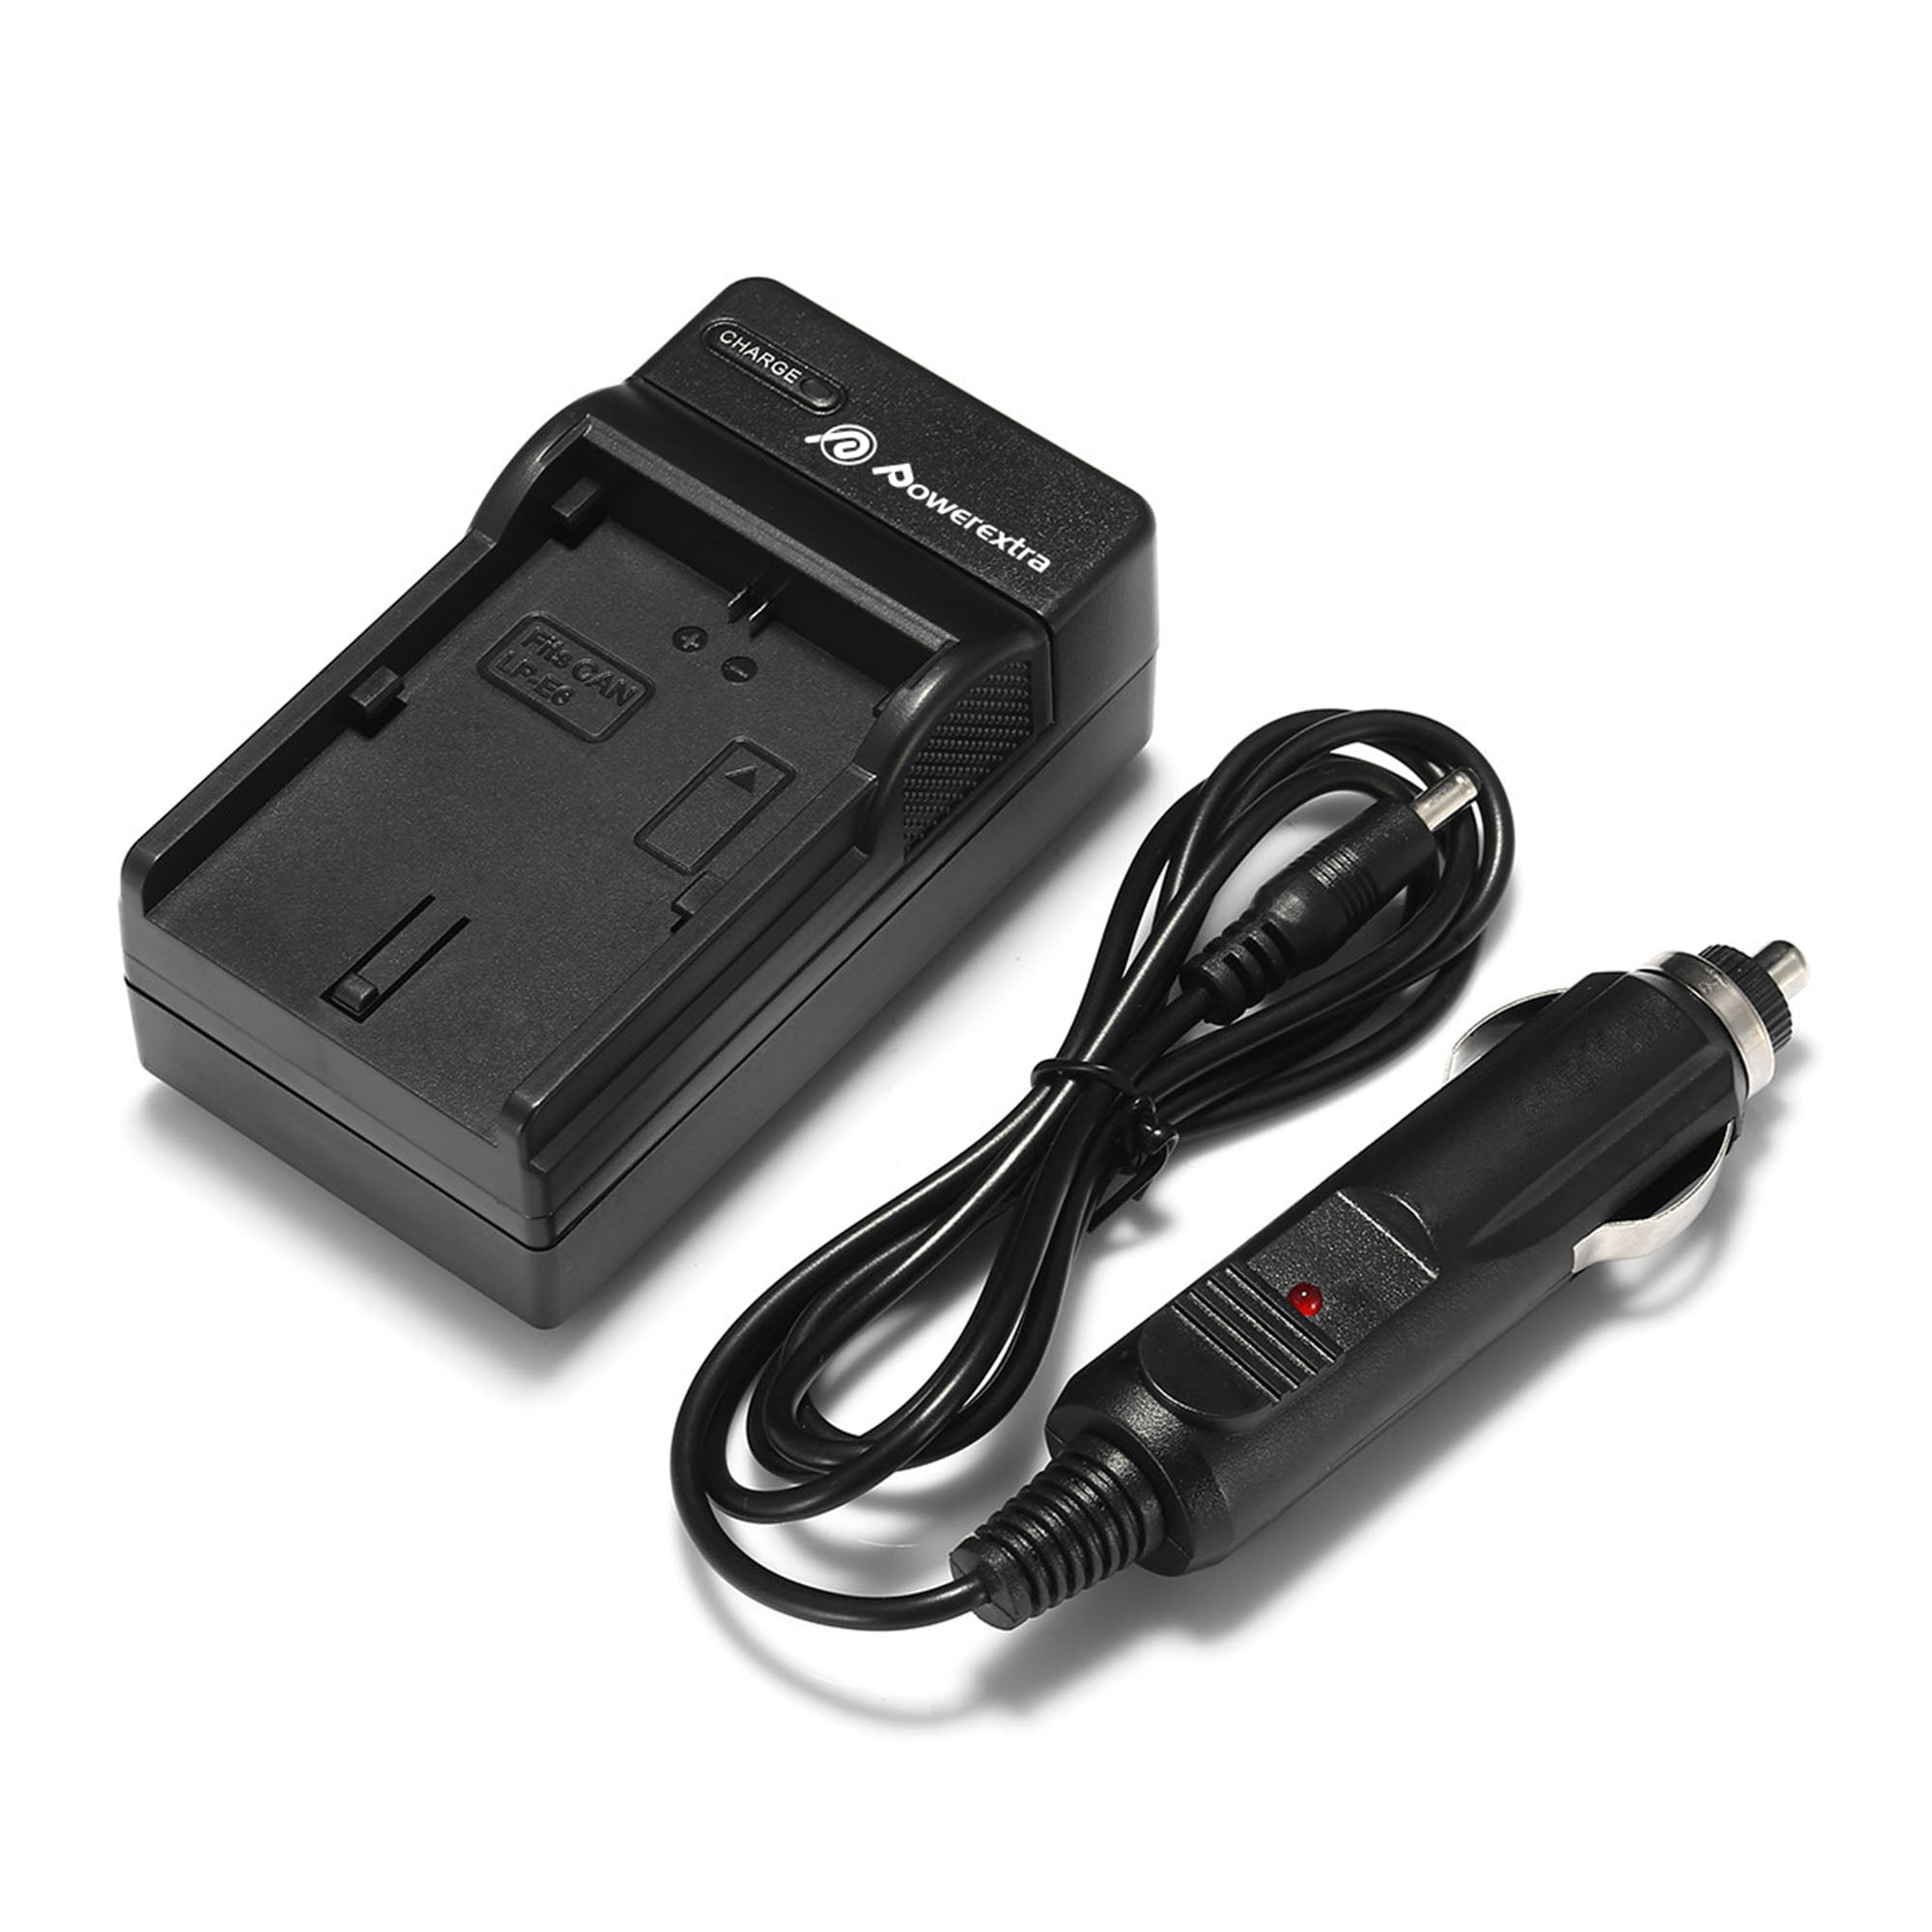 Kastar Fast Charger and Battery 4X for Canon LP-E6 LP-E6N EOS 5DS 5DS R EOS 5D Mark II 5D Mark III 5D Mark IV EOS 60D 60Da EOS 70D XC10 BG-E14 BG-E13 BG-E11 BG-E9 BG-E7 BG-E6 EOS 6D 7D Mark II 